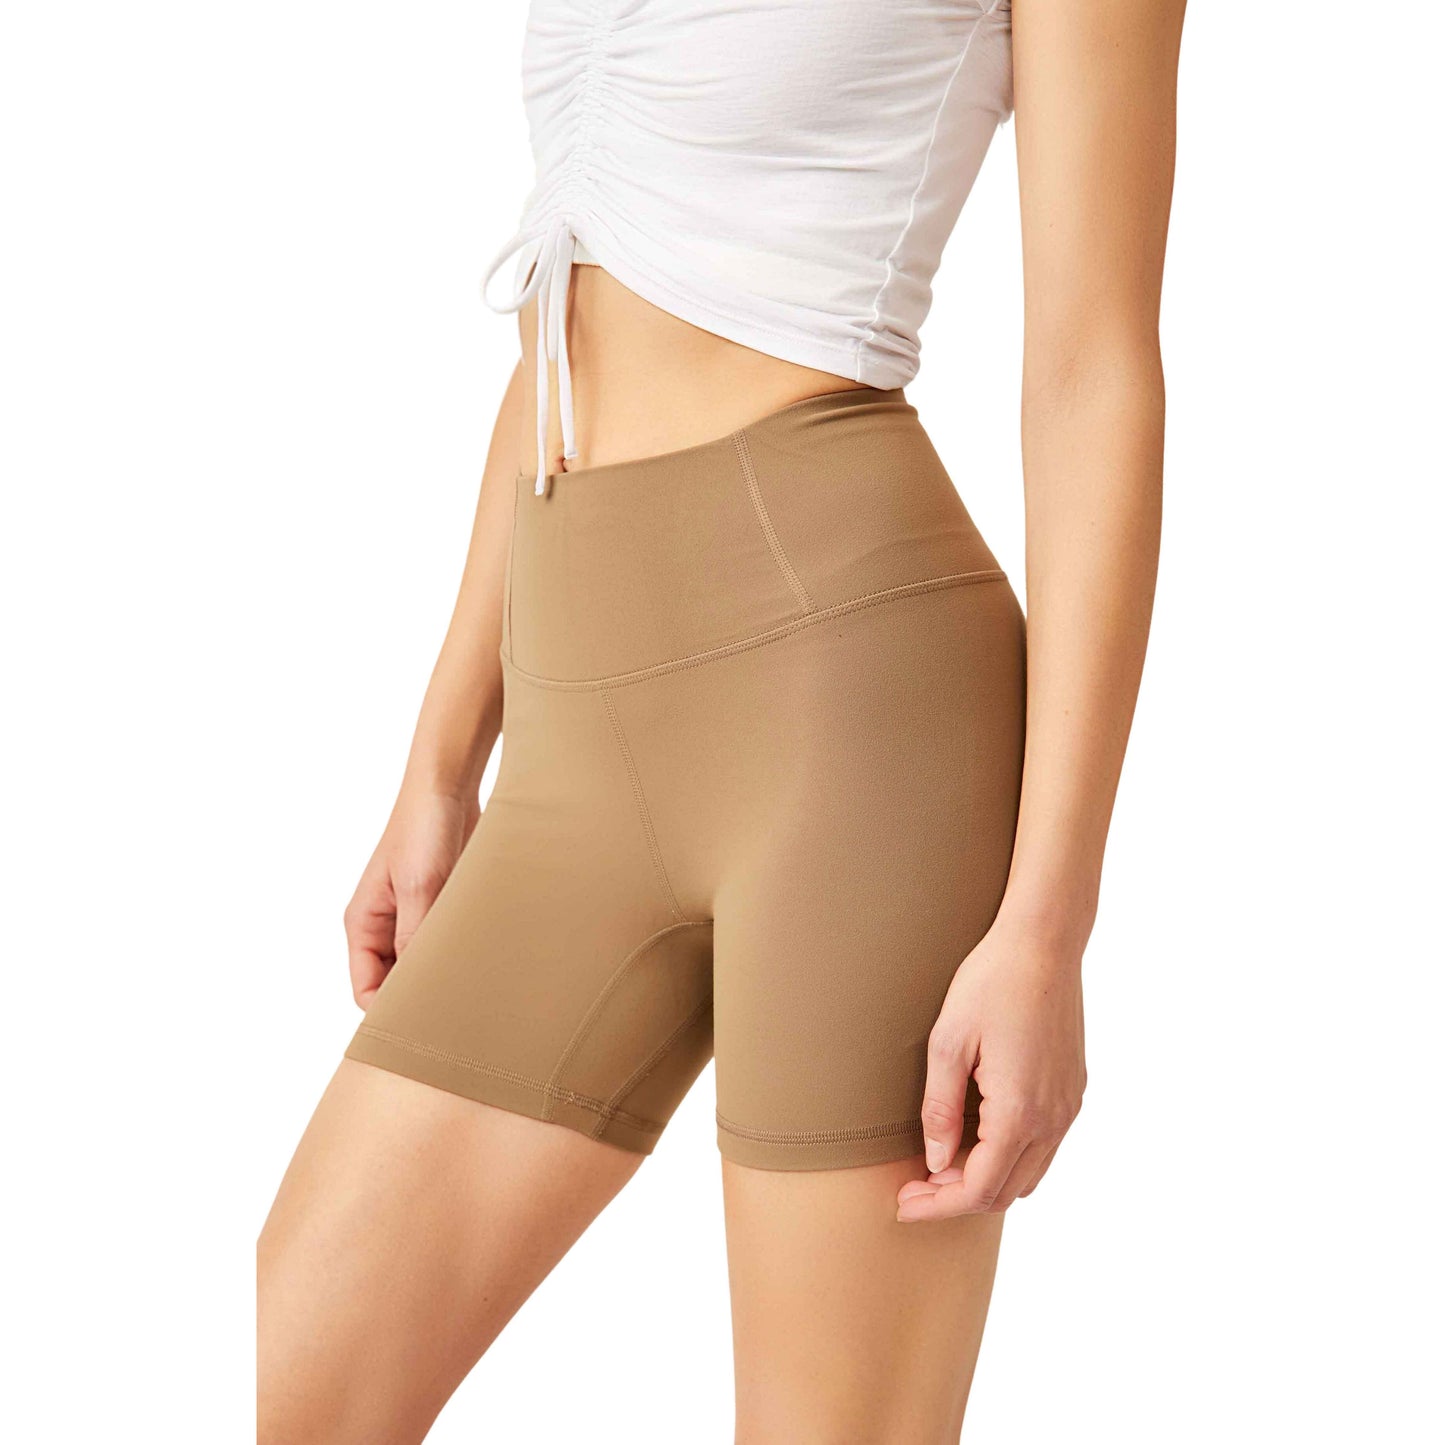 A close-up view of a woman wearing Moonrock high-waisted shapewear shorts and a white tied-up t-shirt, focusing on the mid-section.